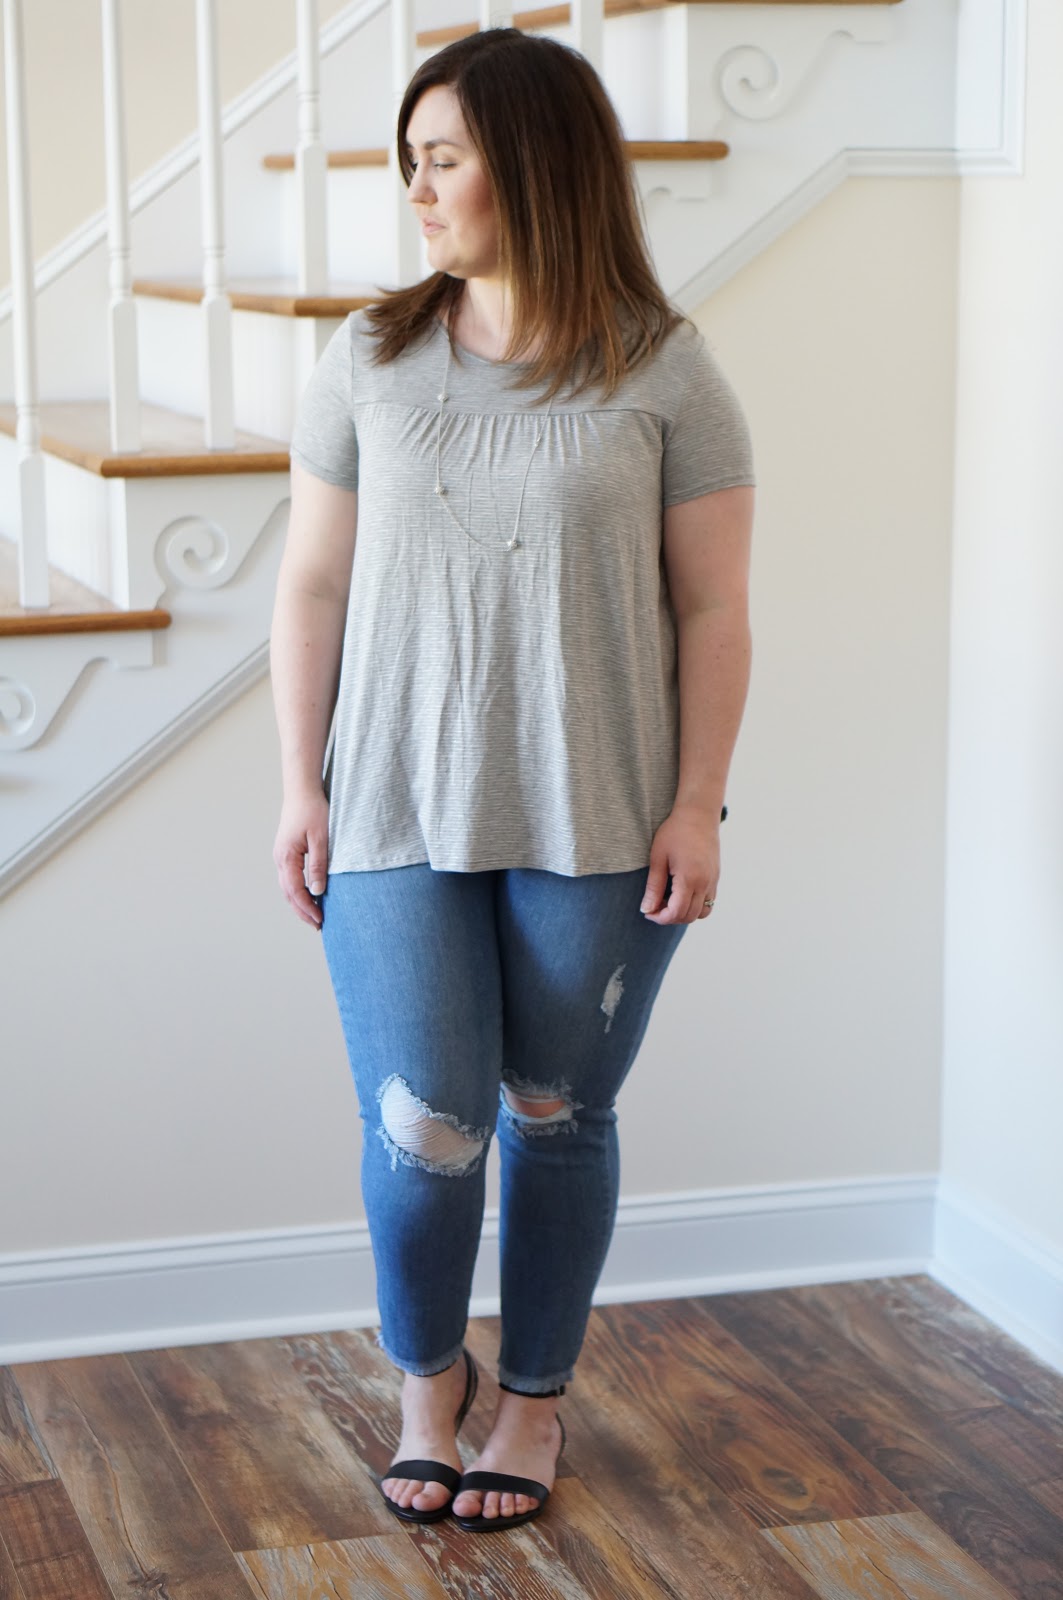 Popular North Carolina style blogger Rebecca Lately shares her latest spring outfit.  Click here to read more!